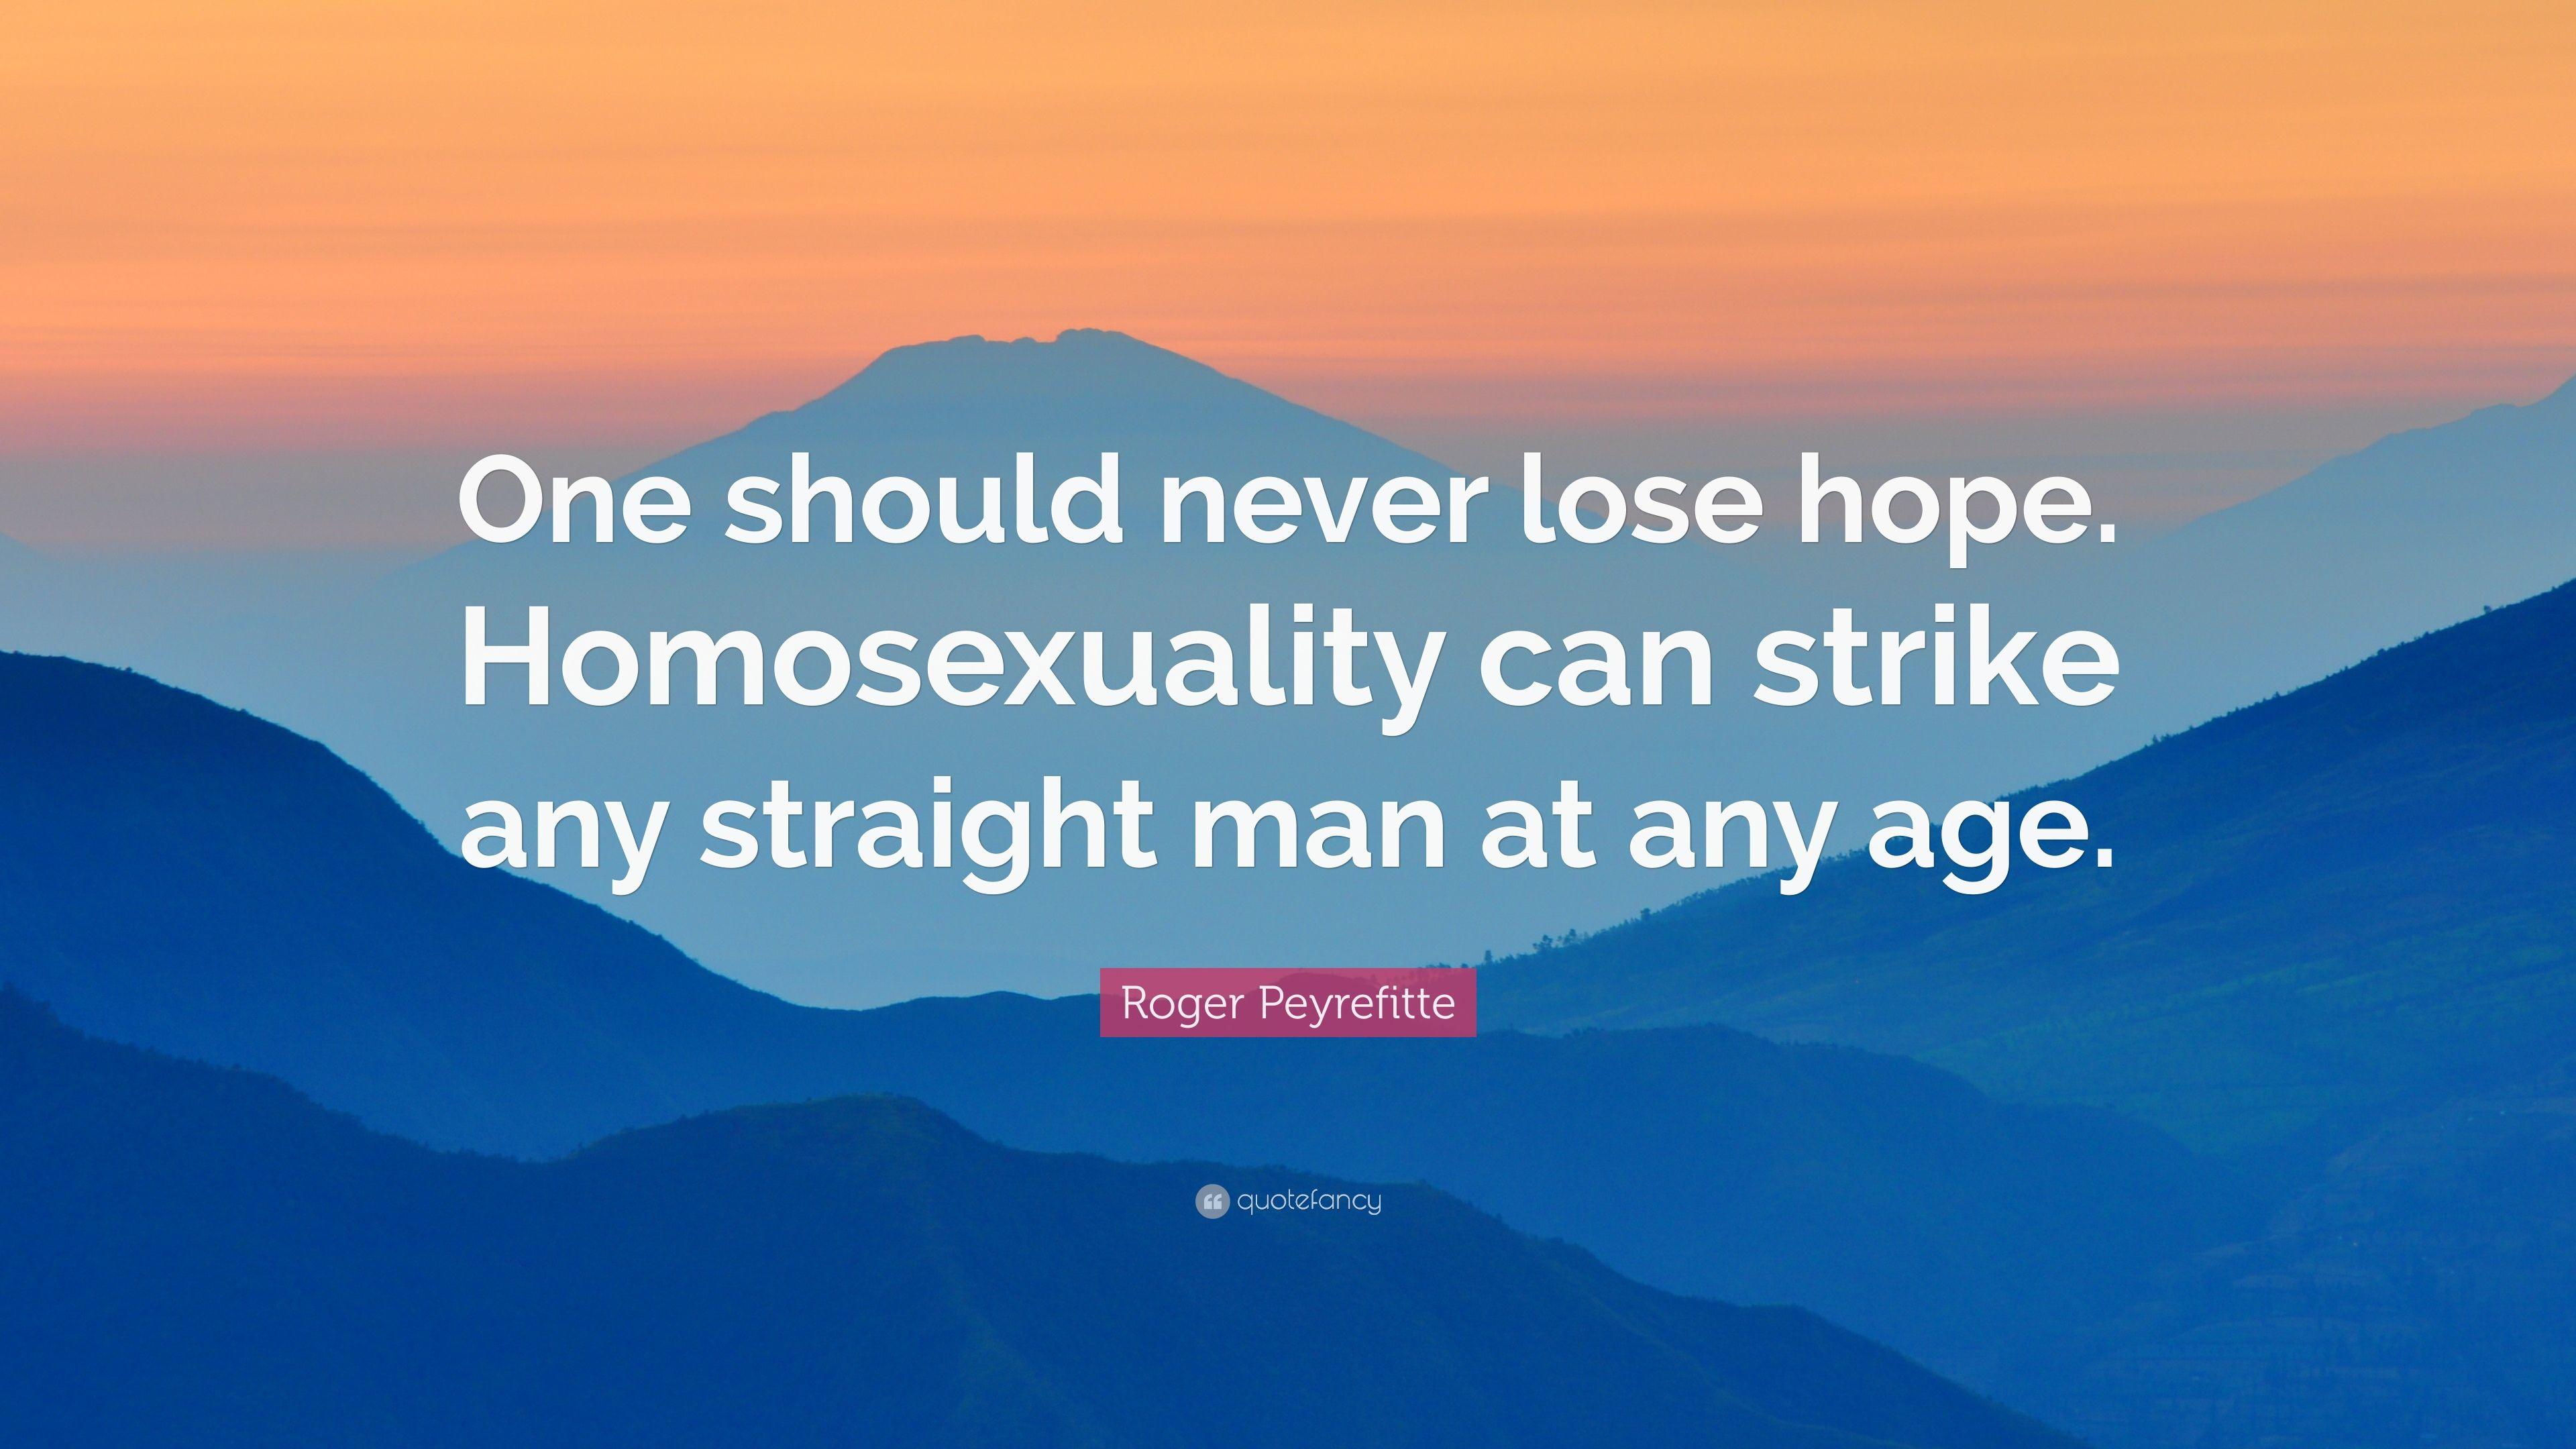 Roger Peyrefitte Quote: “One should never lose hope. Homosexuality